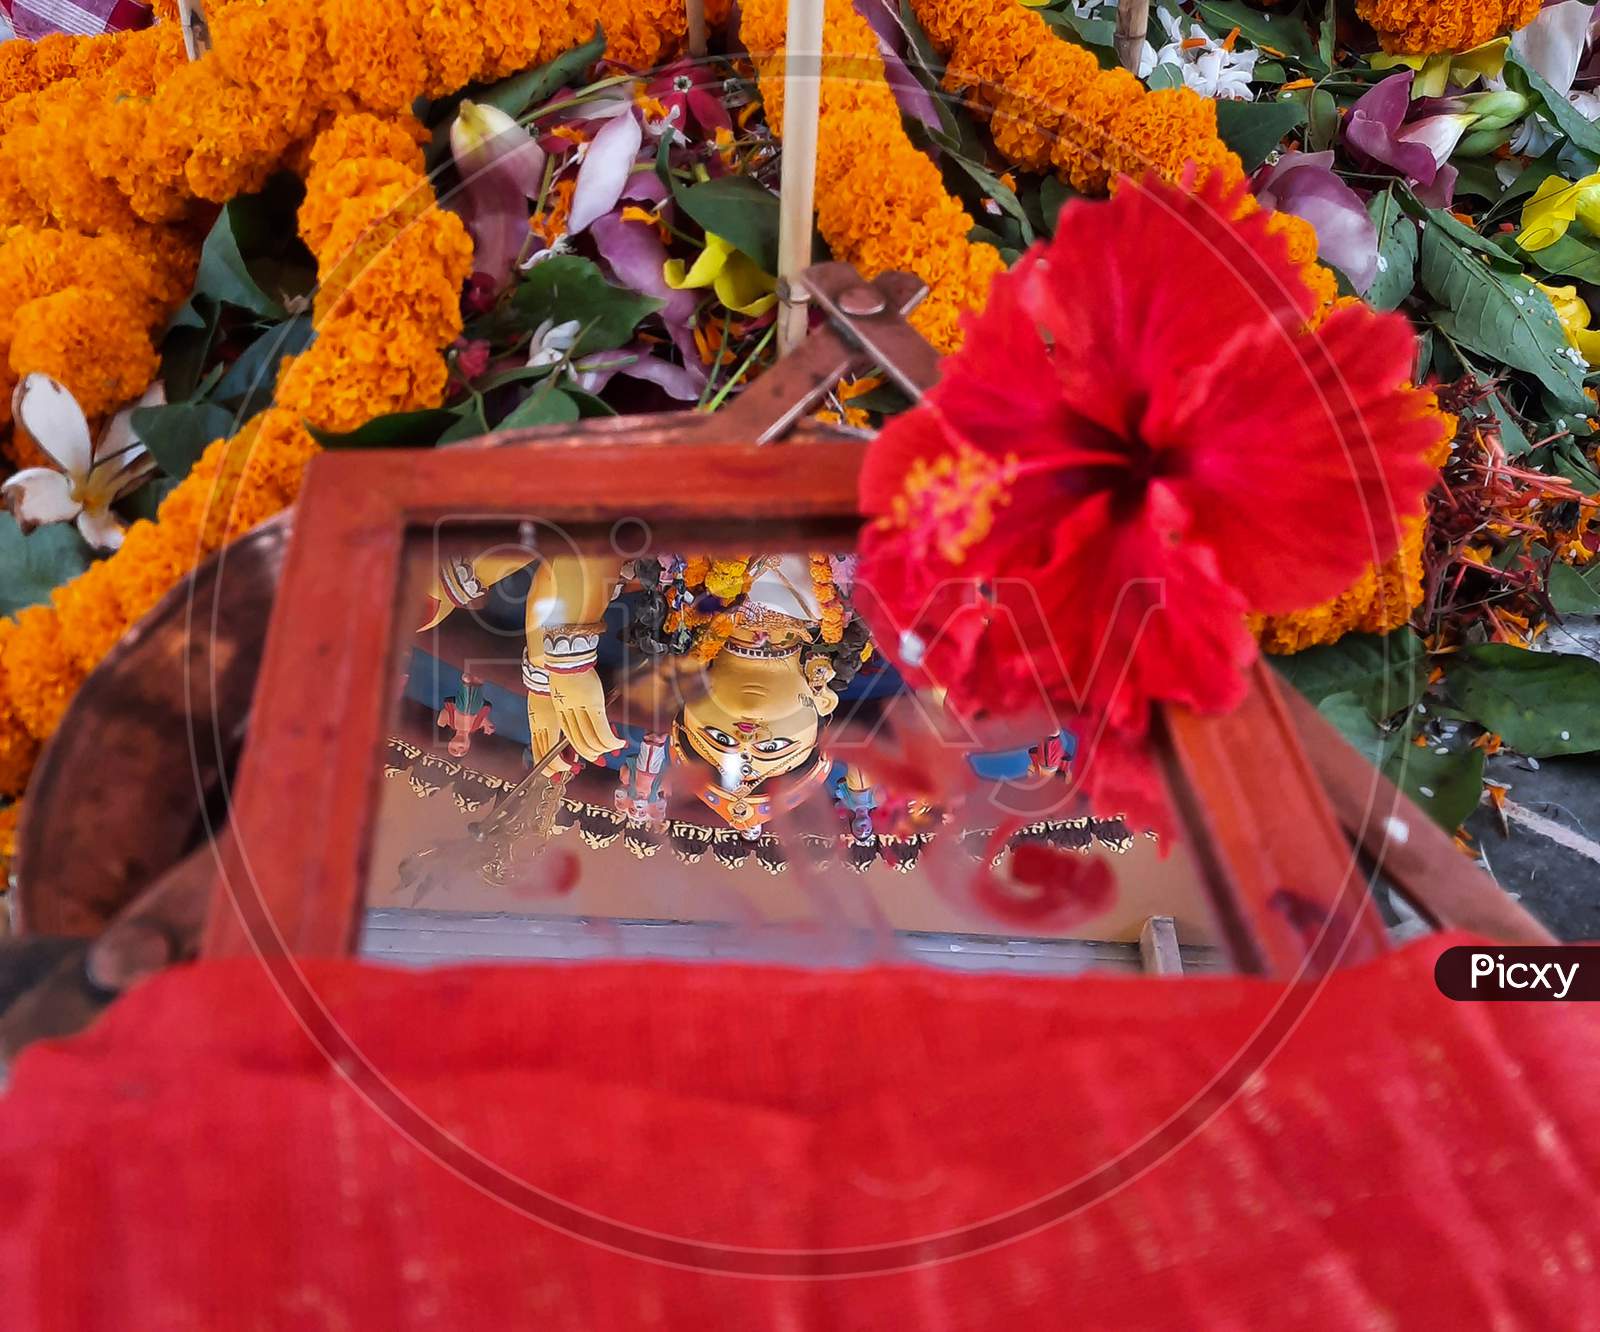 15 Oct 2021-Durgapuja Dashami Puja And Darpan Visarjan(A Ritual Where The Image Of The Goddess Is Captured In A Mirror Placed In A Bowl Full Of Water -Kolkata West Bengal India